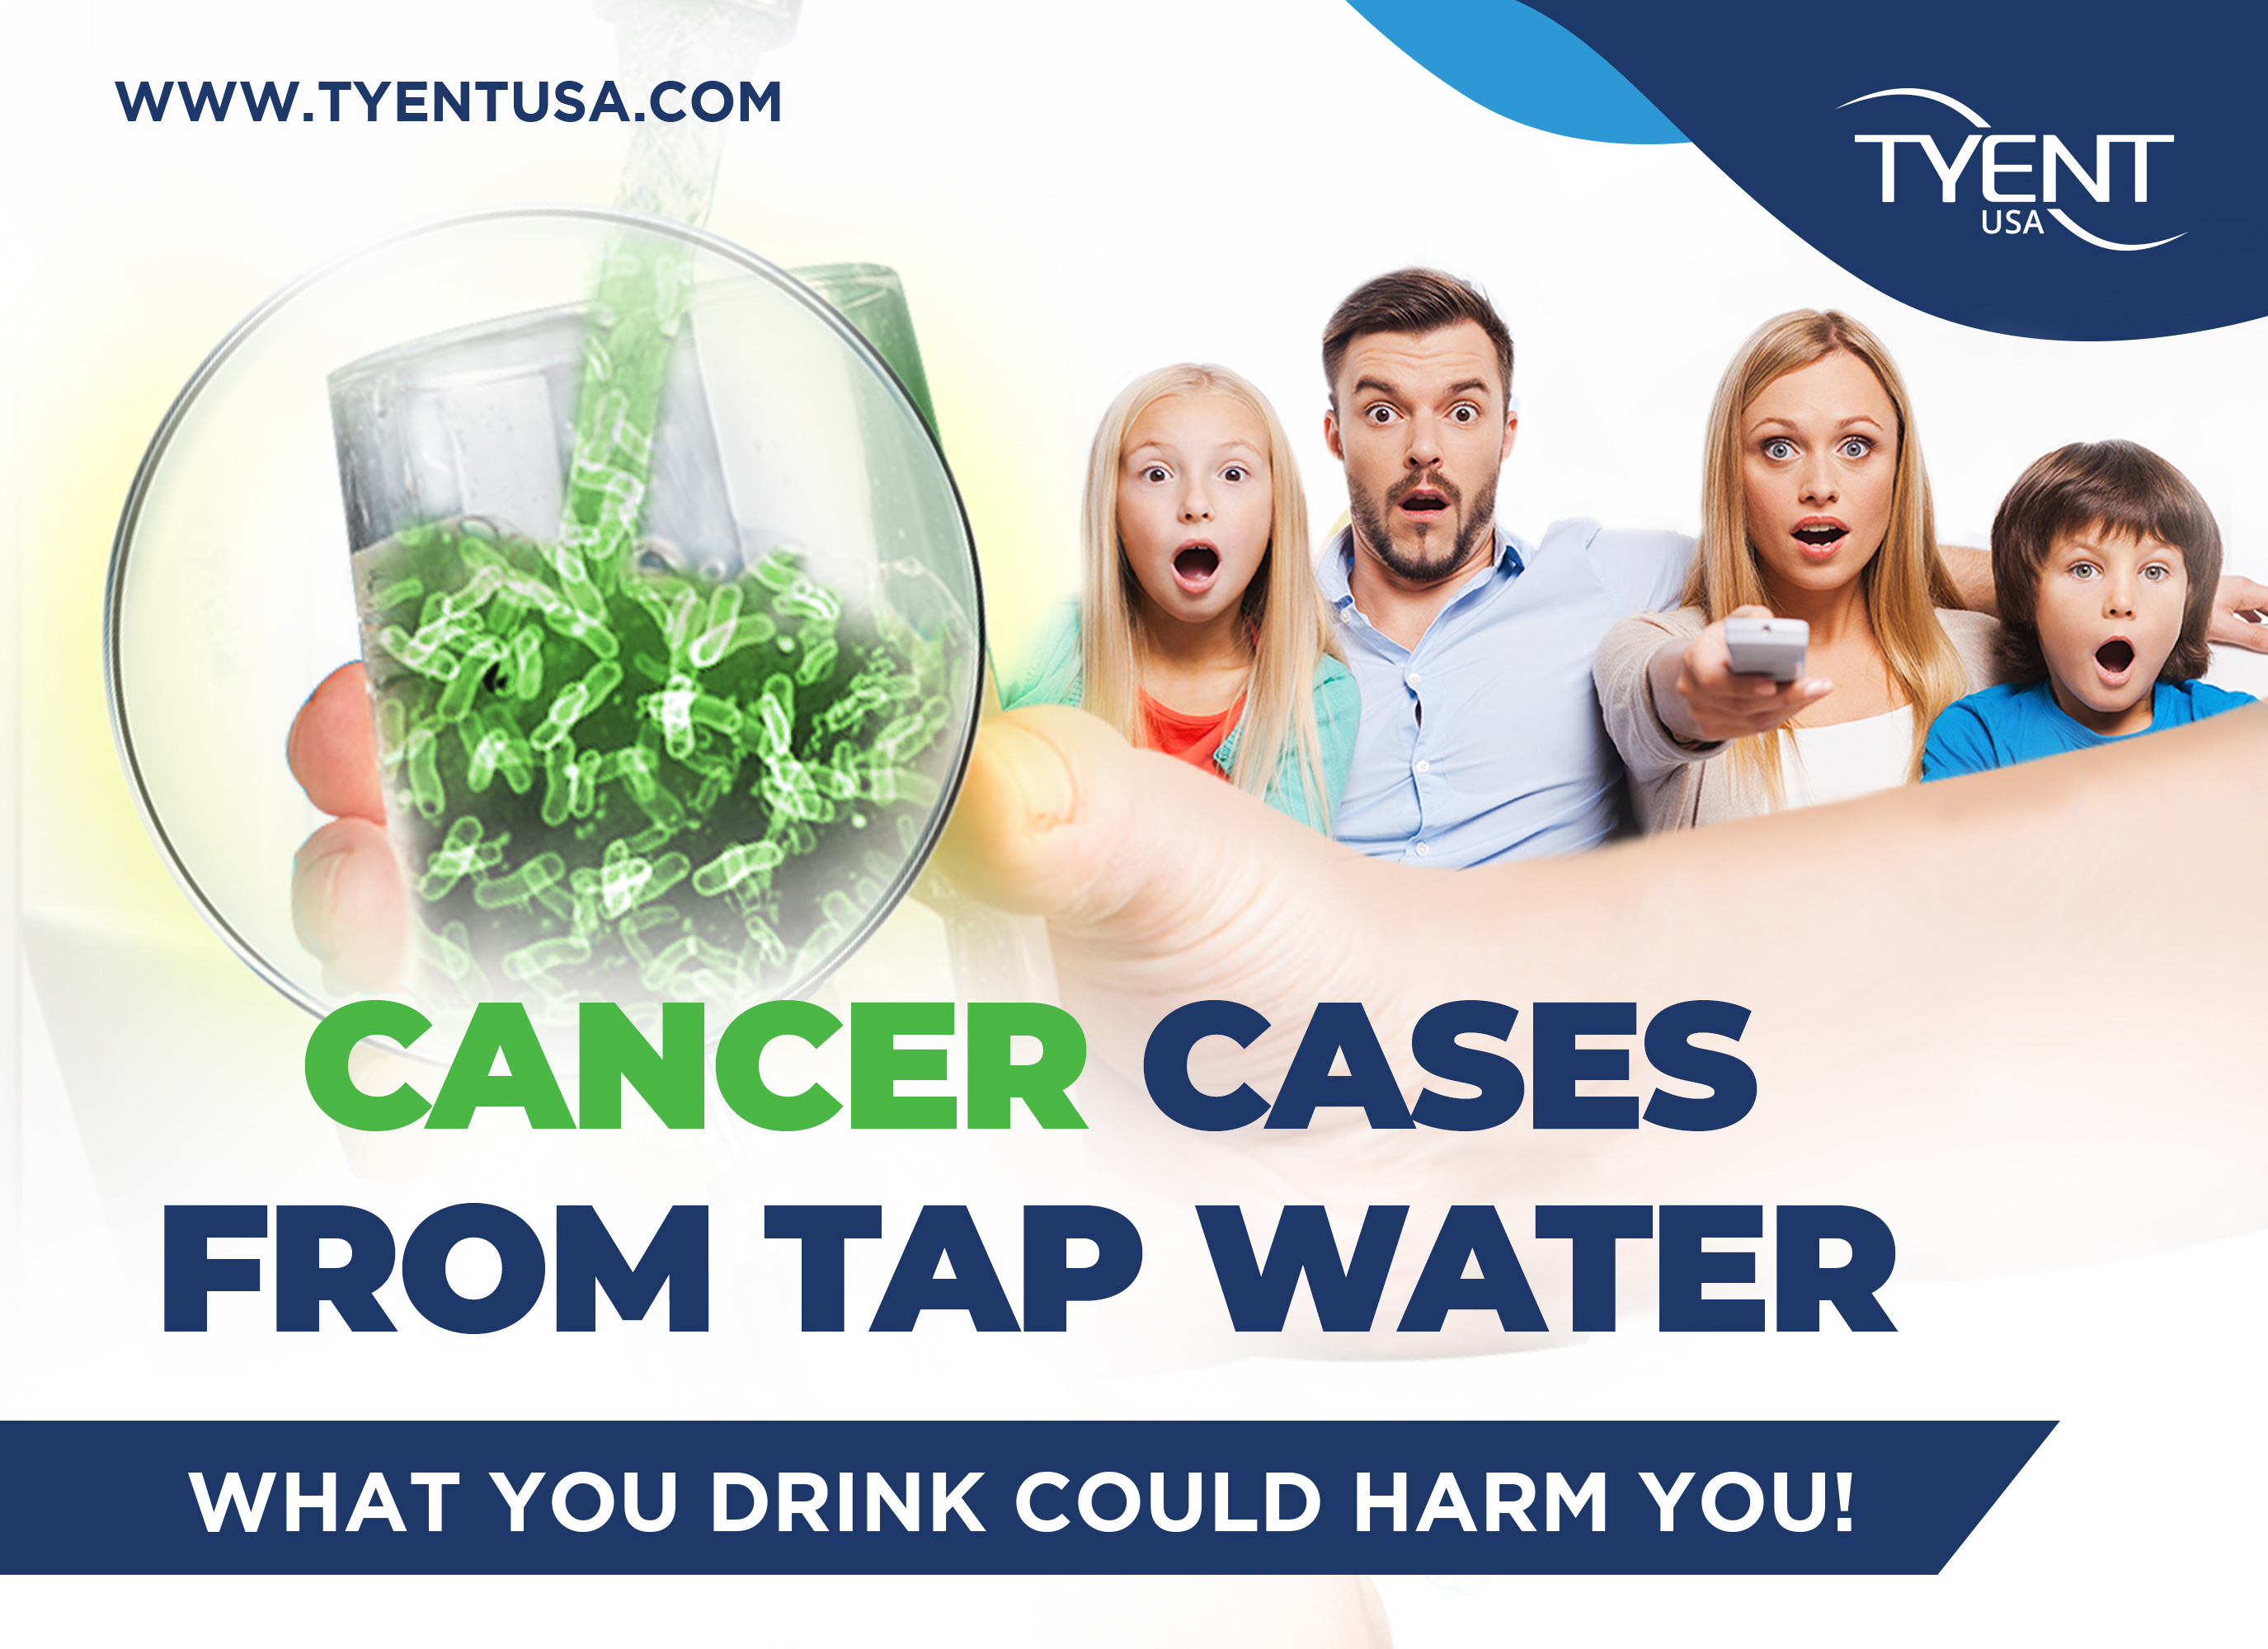 100,000 Cancer Cases from Contaminants in Tap Water